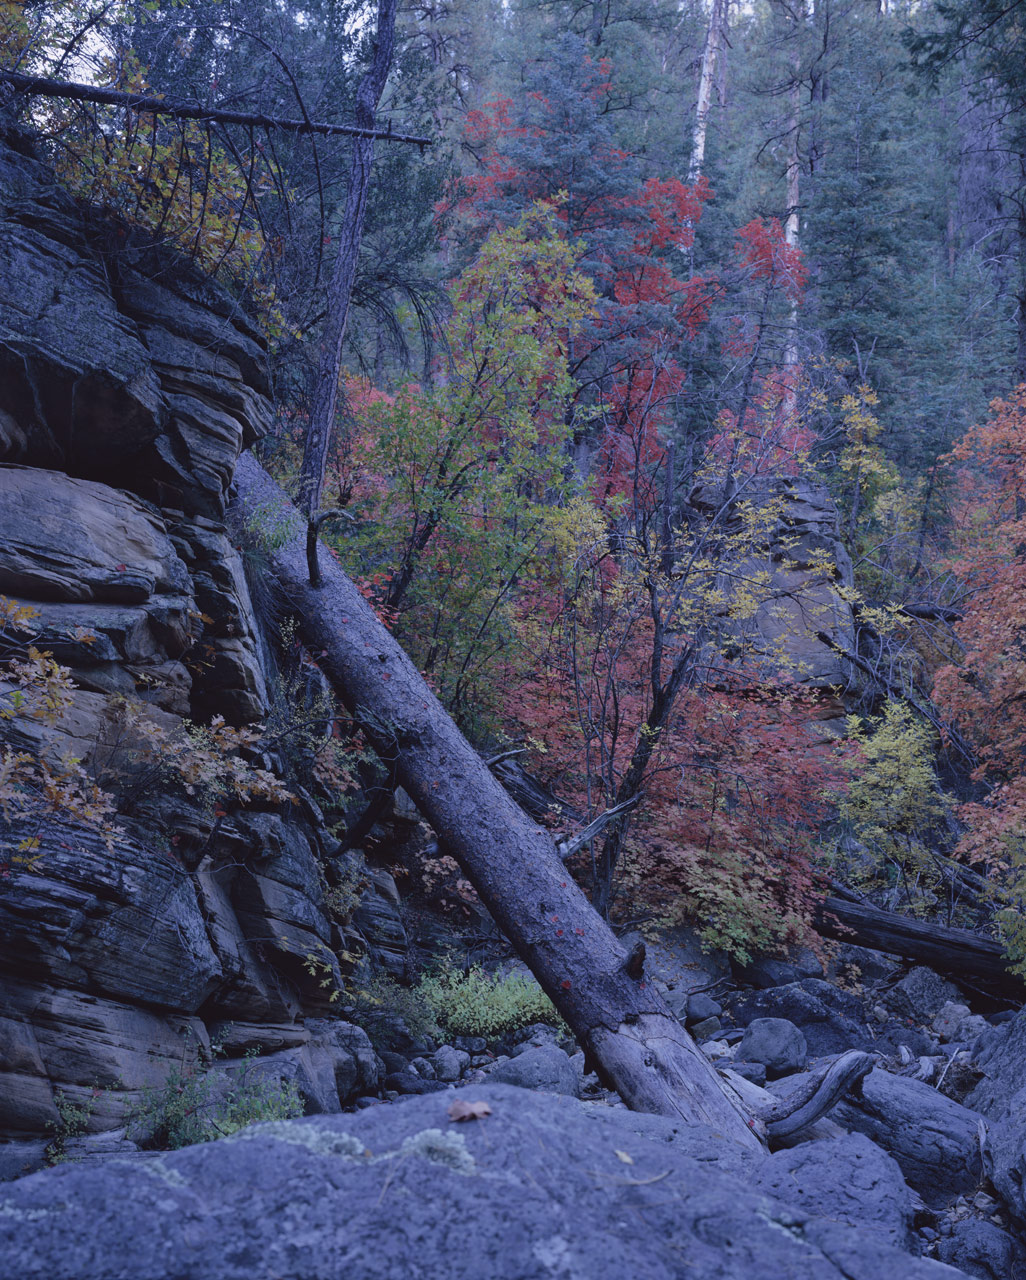 Rocks along the wash bank, dead tree trunks, and orange and red leaves on the Maples near Cave Springs in Oak Creek Canyon